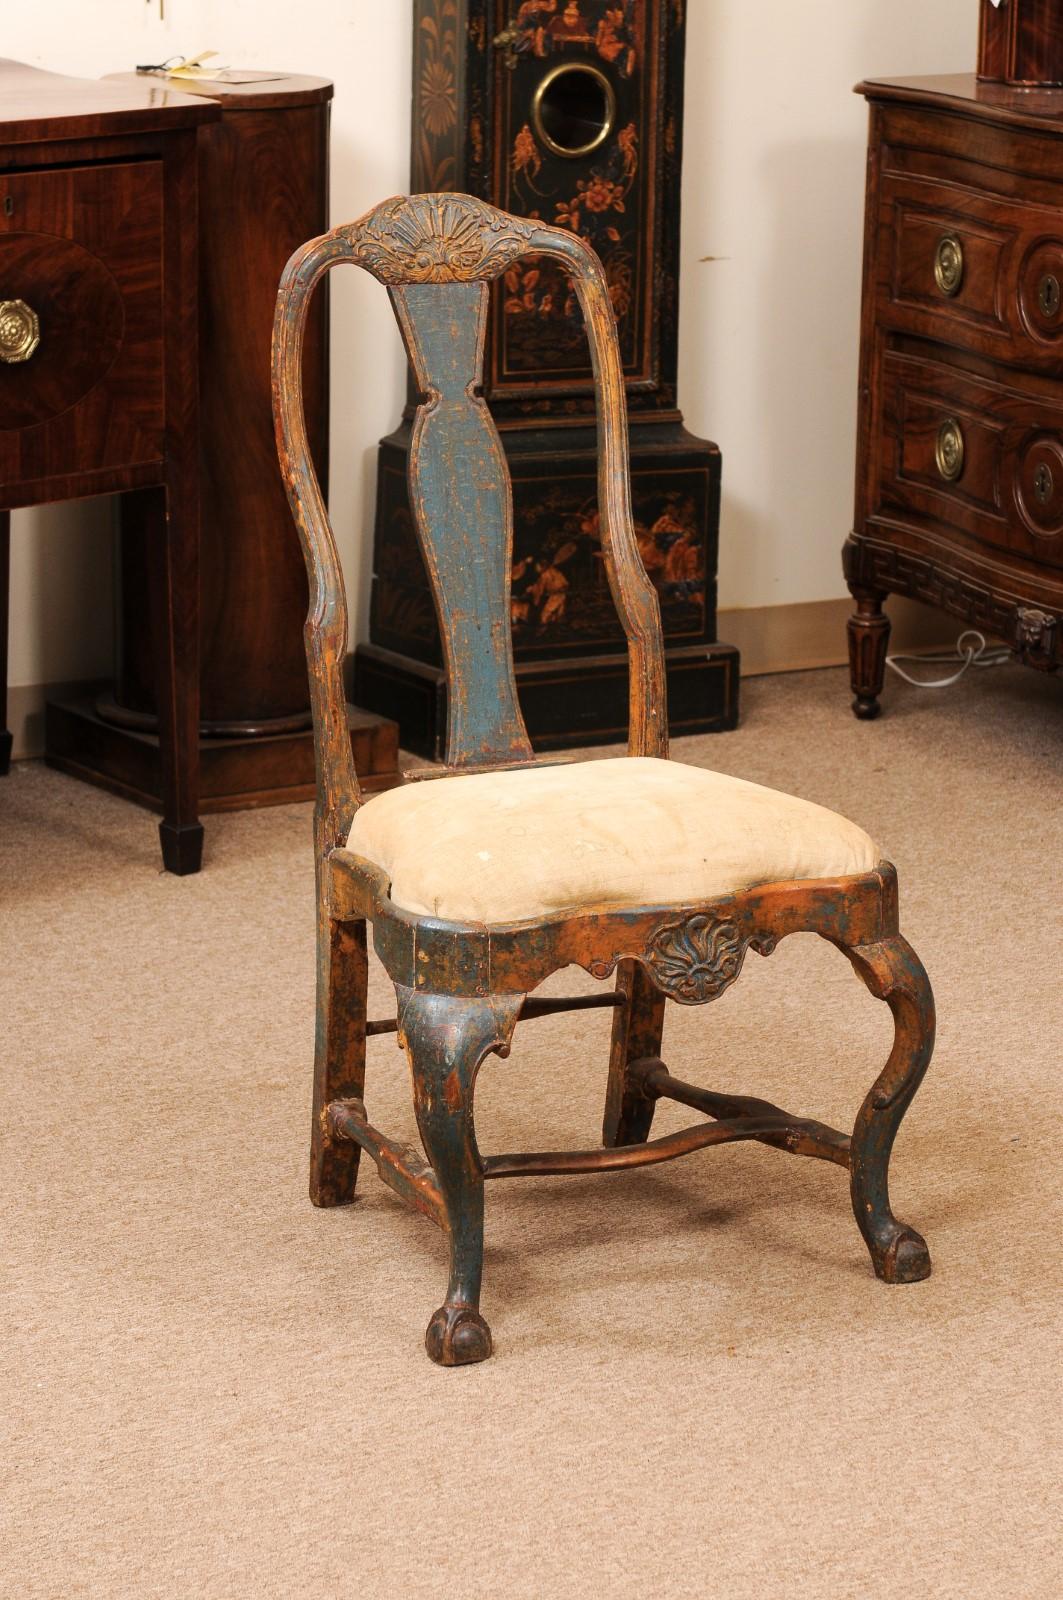 18th Century Swedish Painted Blue Side Chair with Shell Carving, Slip Seat & Cabriole Legs ending in Ball & Claw Feet